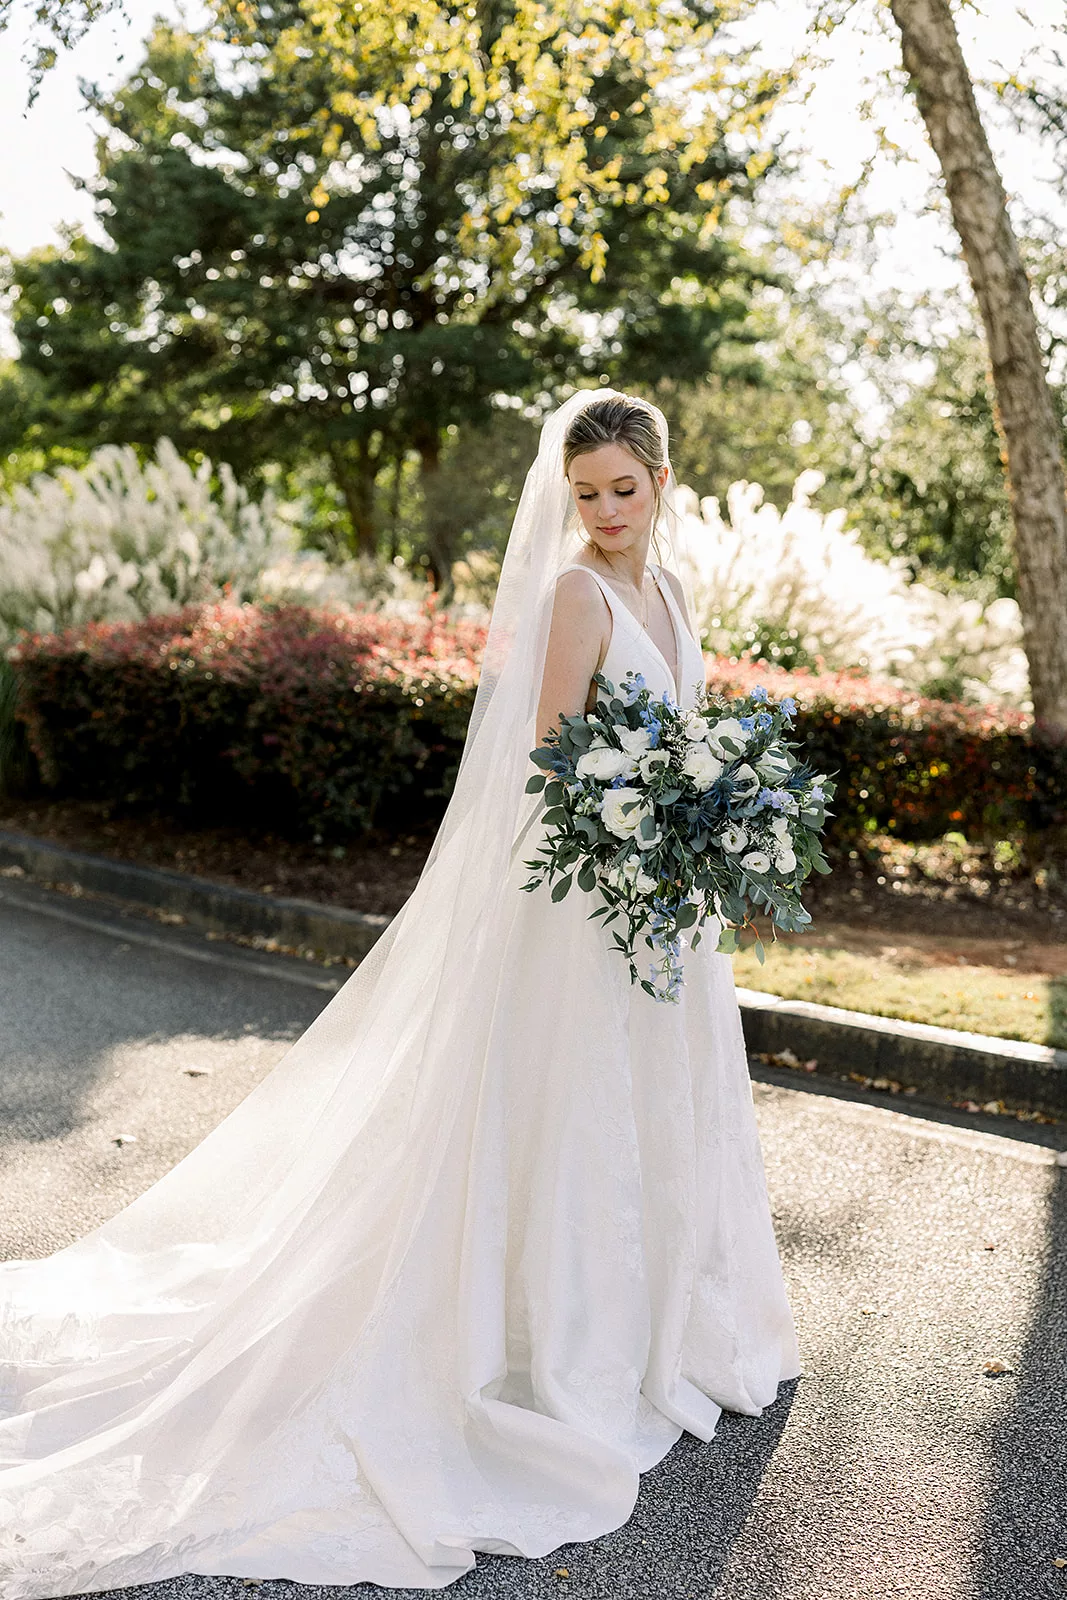 A bride gazes down her shoulder while standing in a garden path while holding her blue and white bouquet